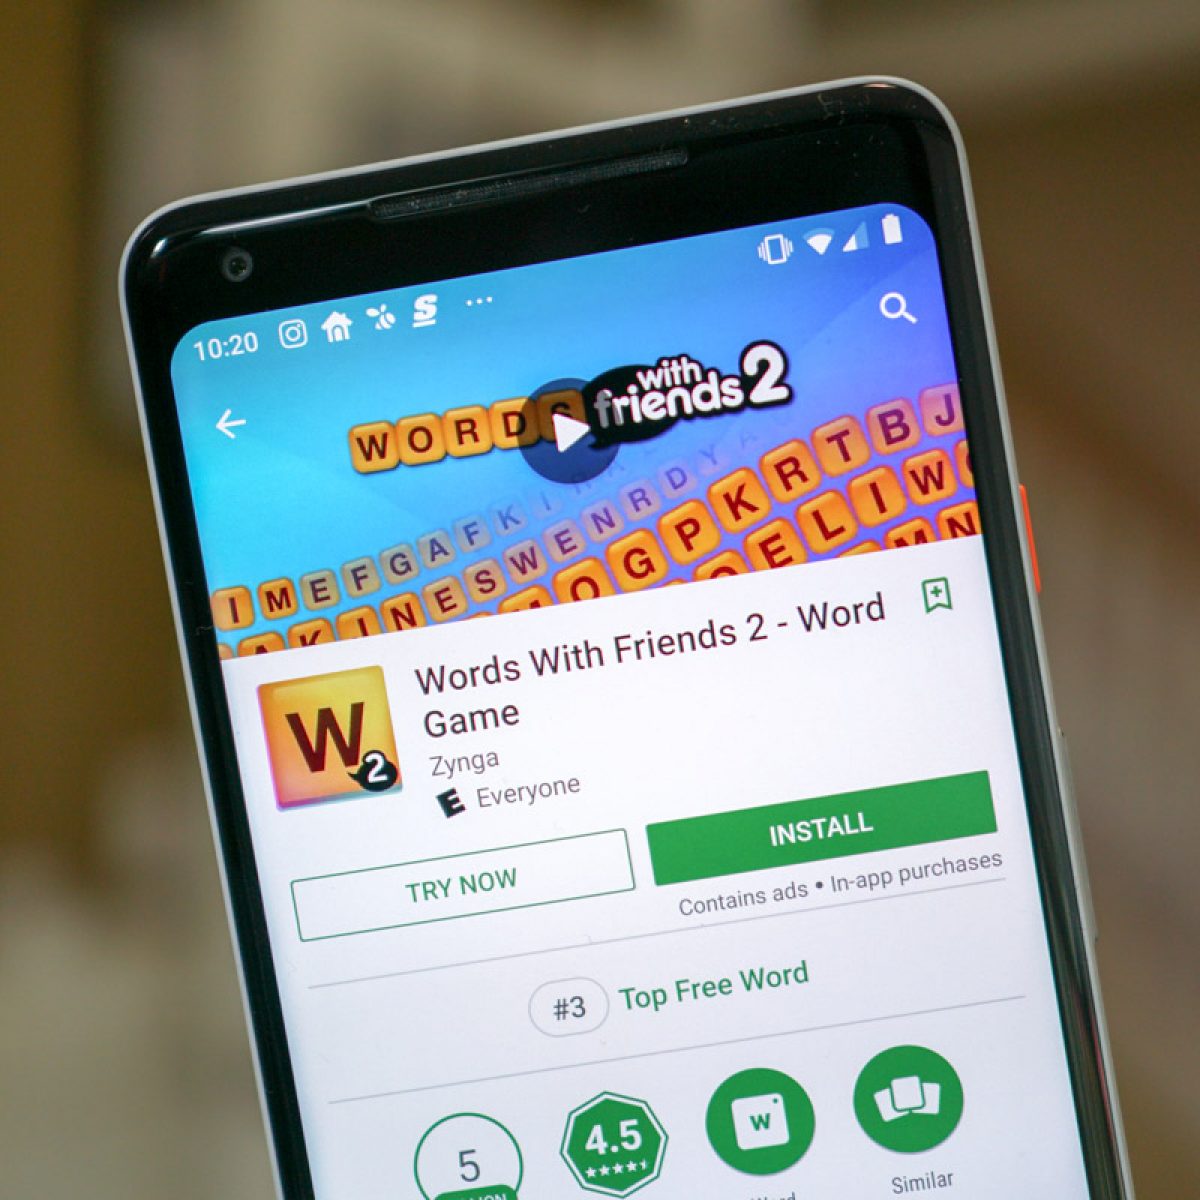 Google Play Instant lets you try Android games before downloading